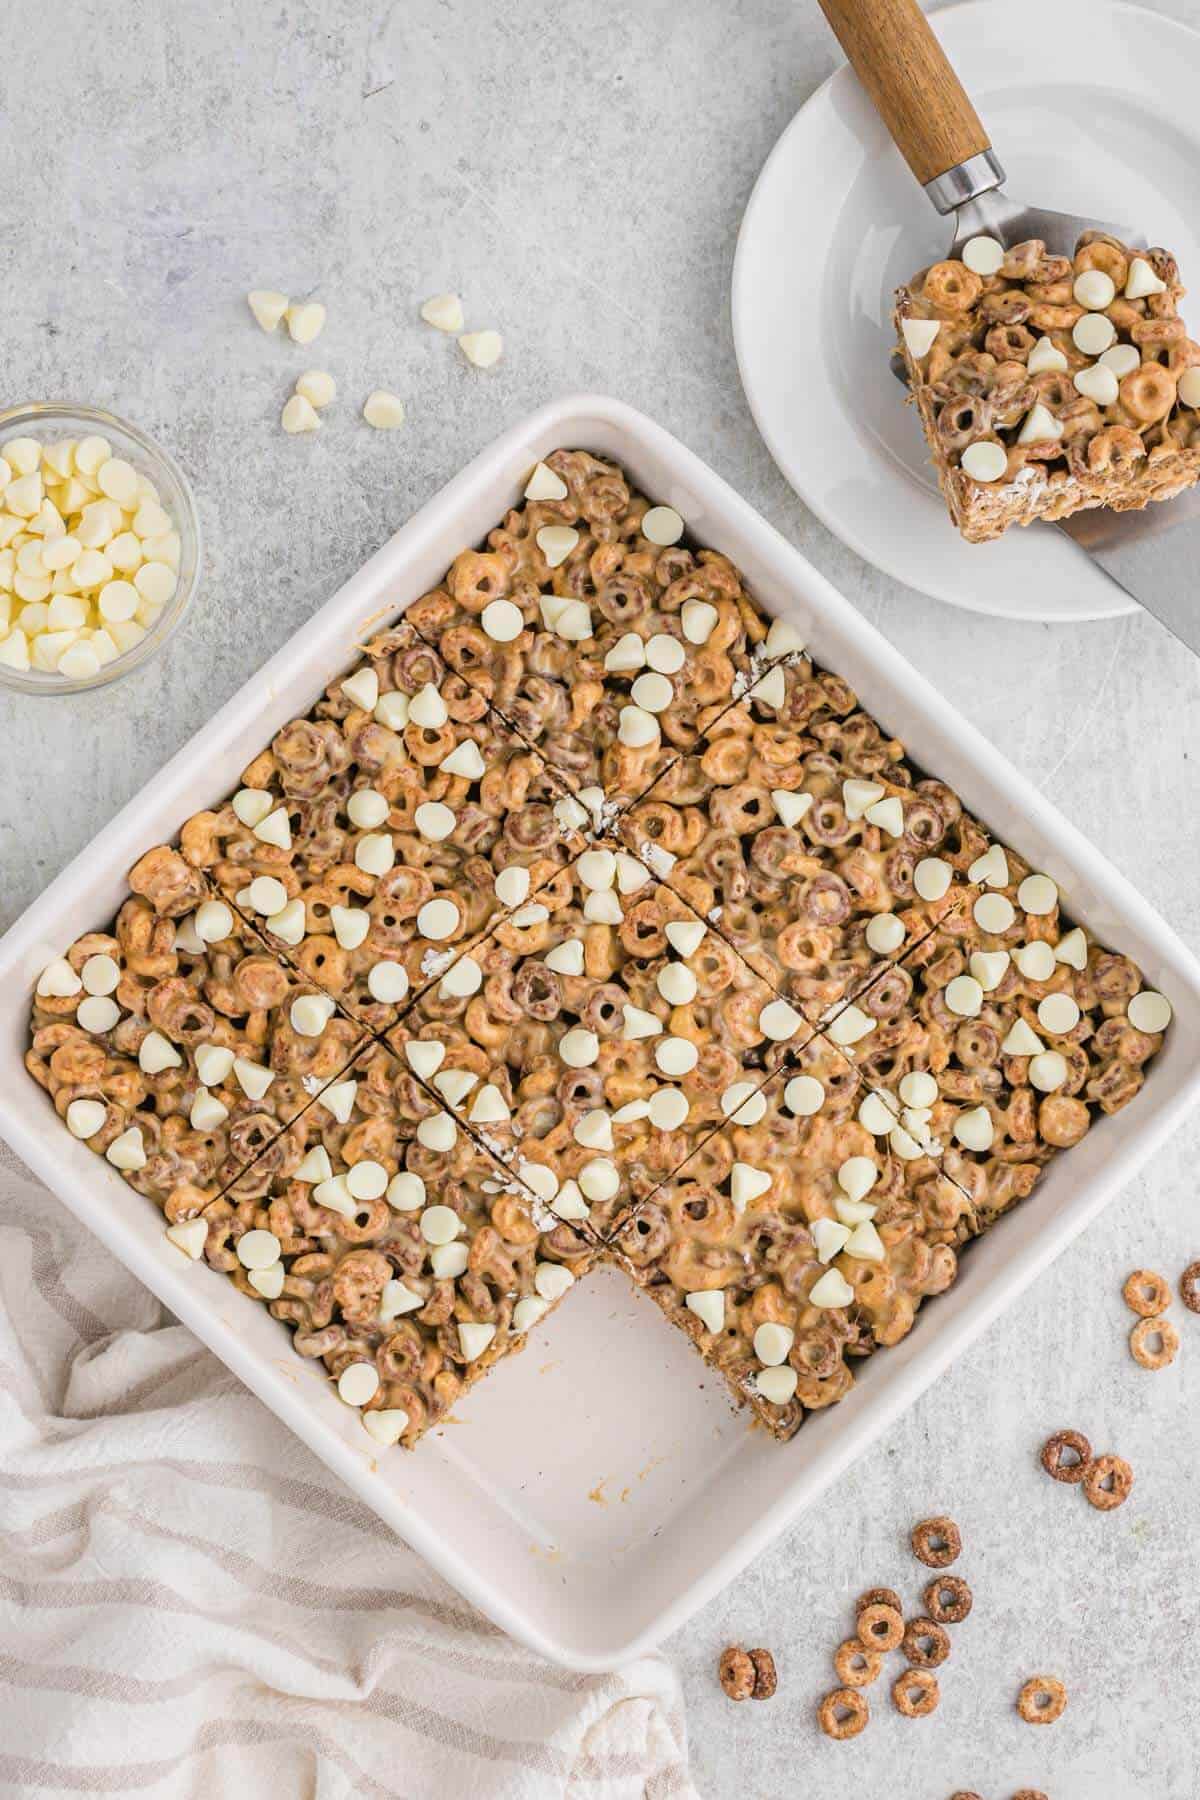 White chocolate peanut butter cheerios treats in a pan.